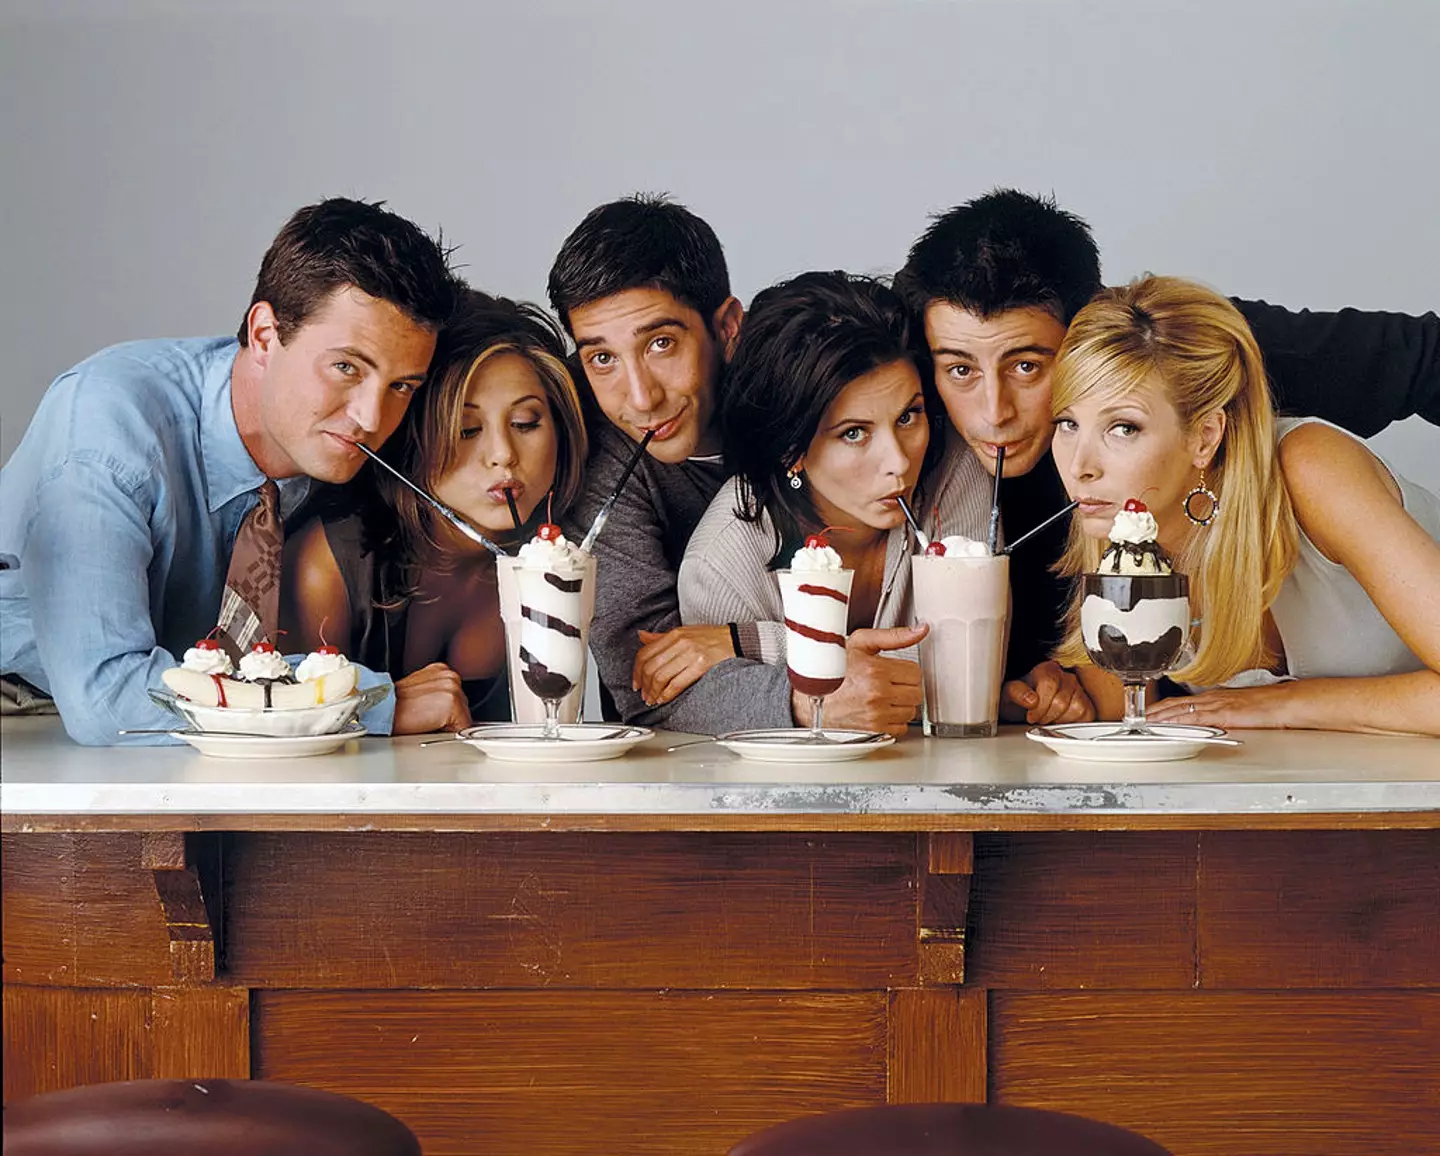 Perry starred as Chandler in Friends. (NBC / Contributor / Getty Images)